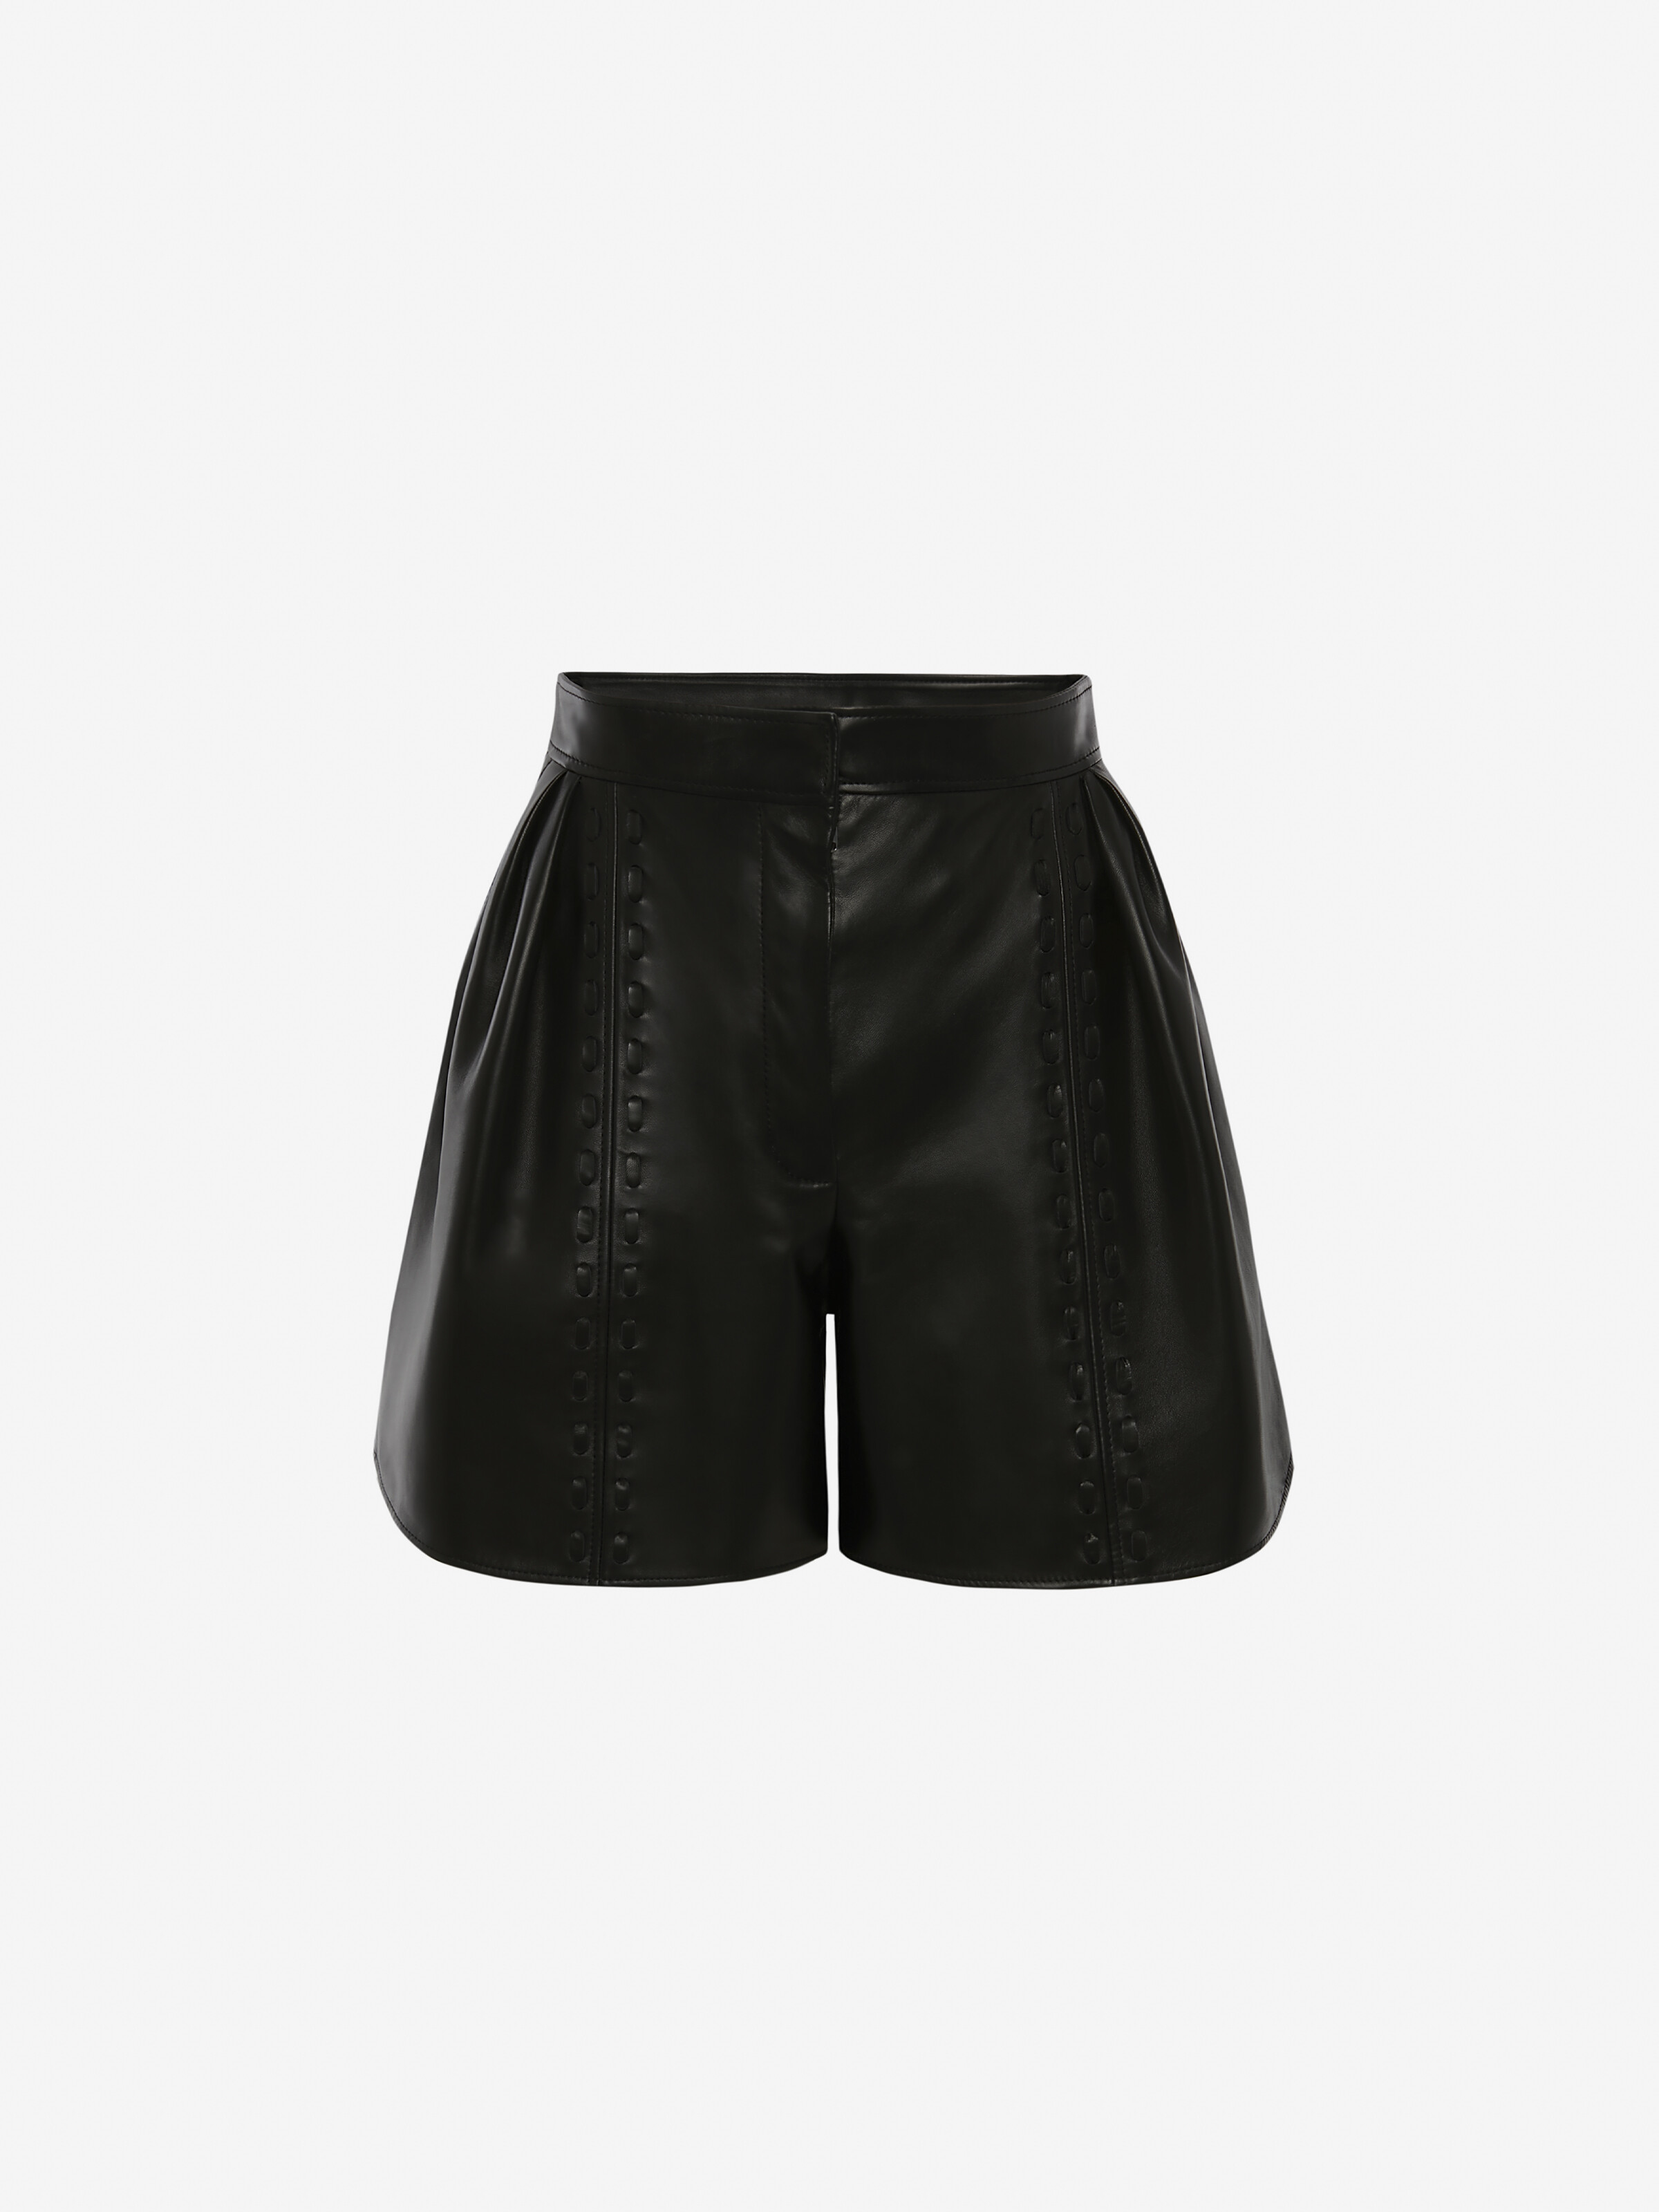 ALEXANDER MCQUEEN COUTURE STITCH LEATHER SHORTS,688579Q5AHW